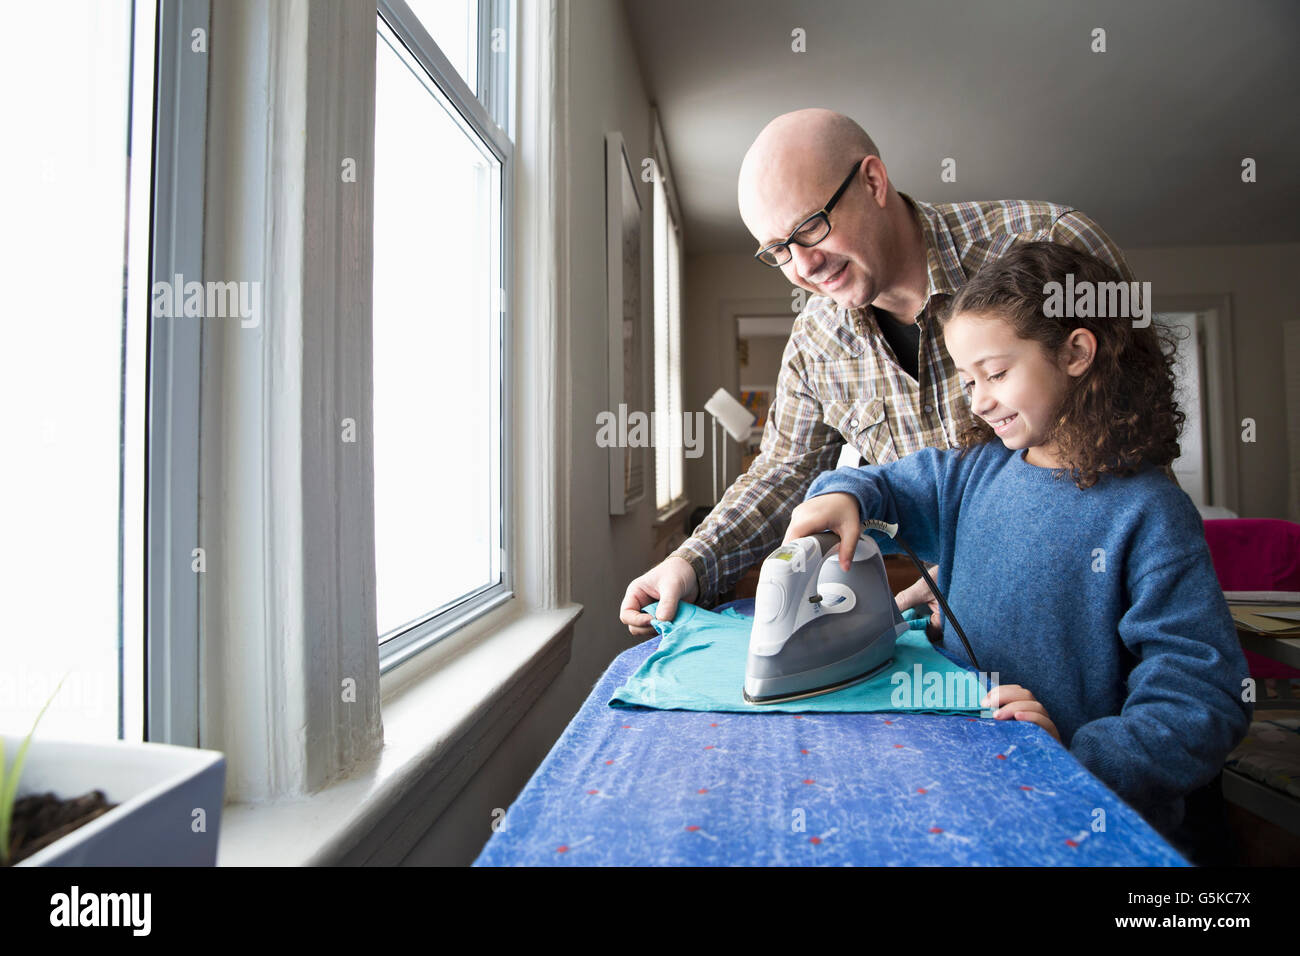 Father teaching daughter to iron fabric Stock Photo